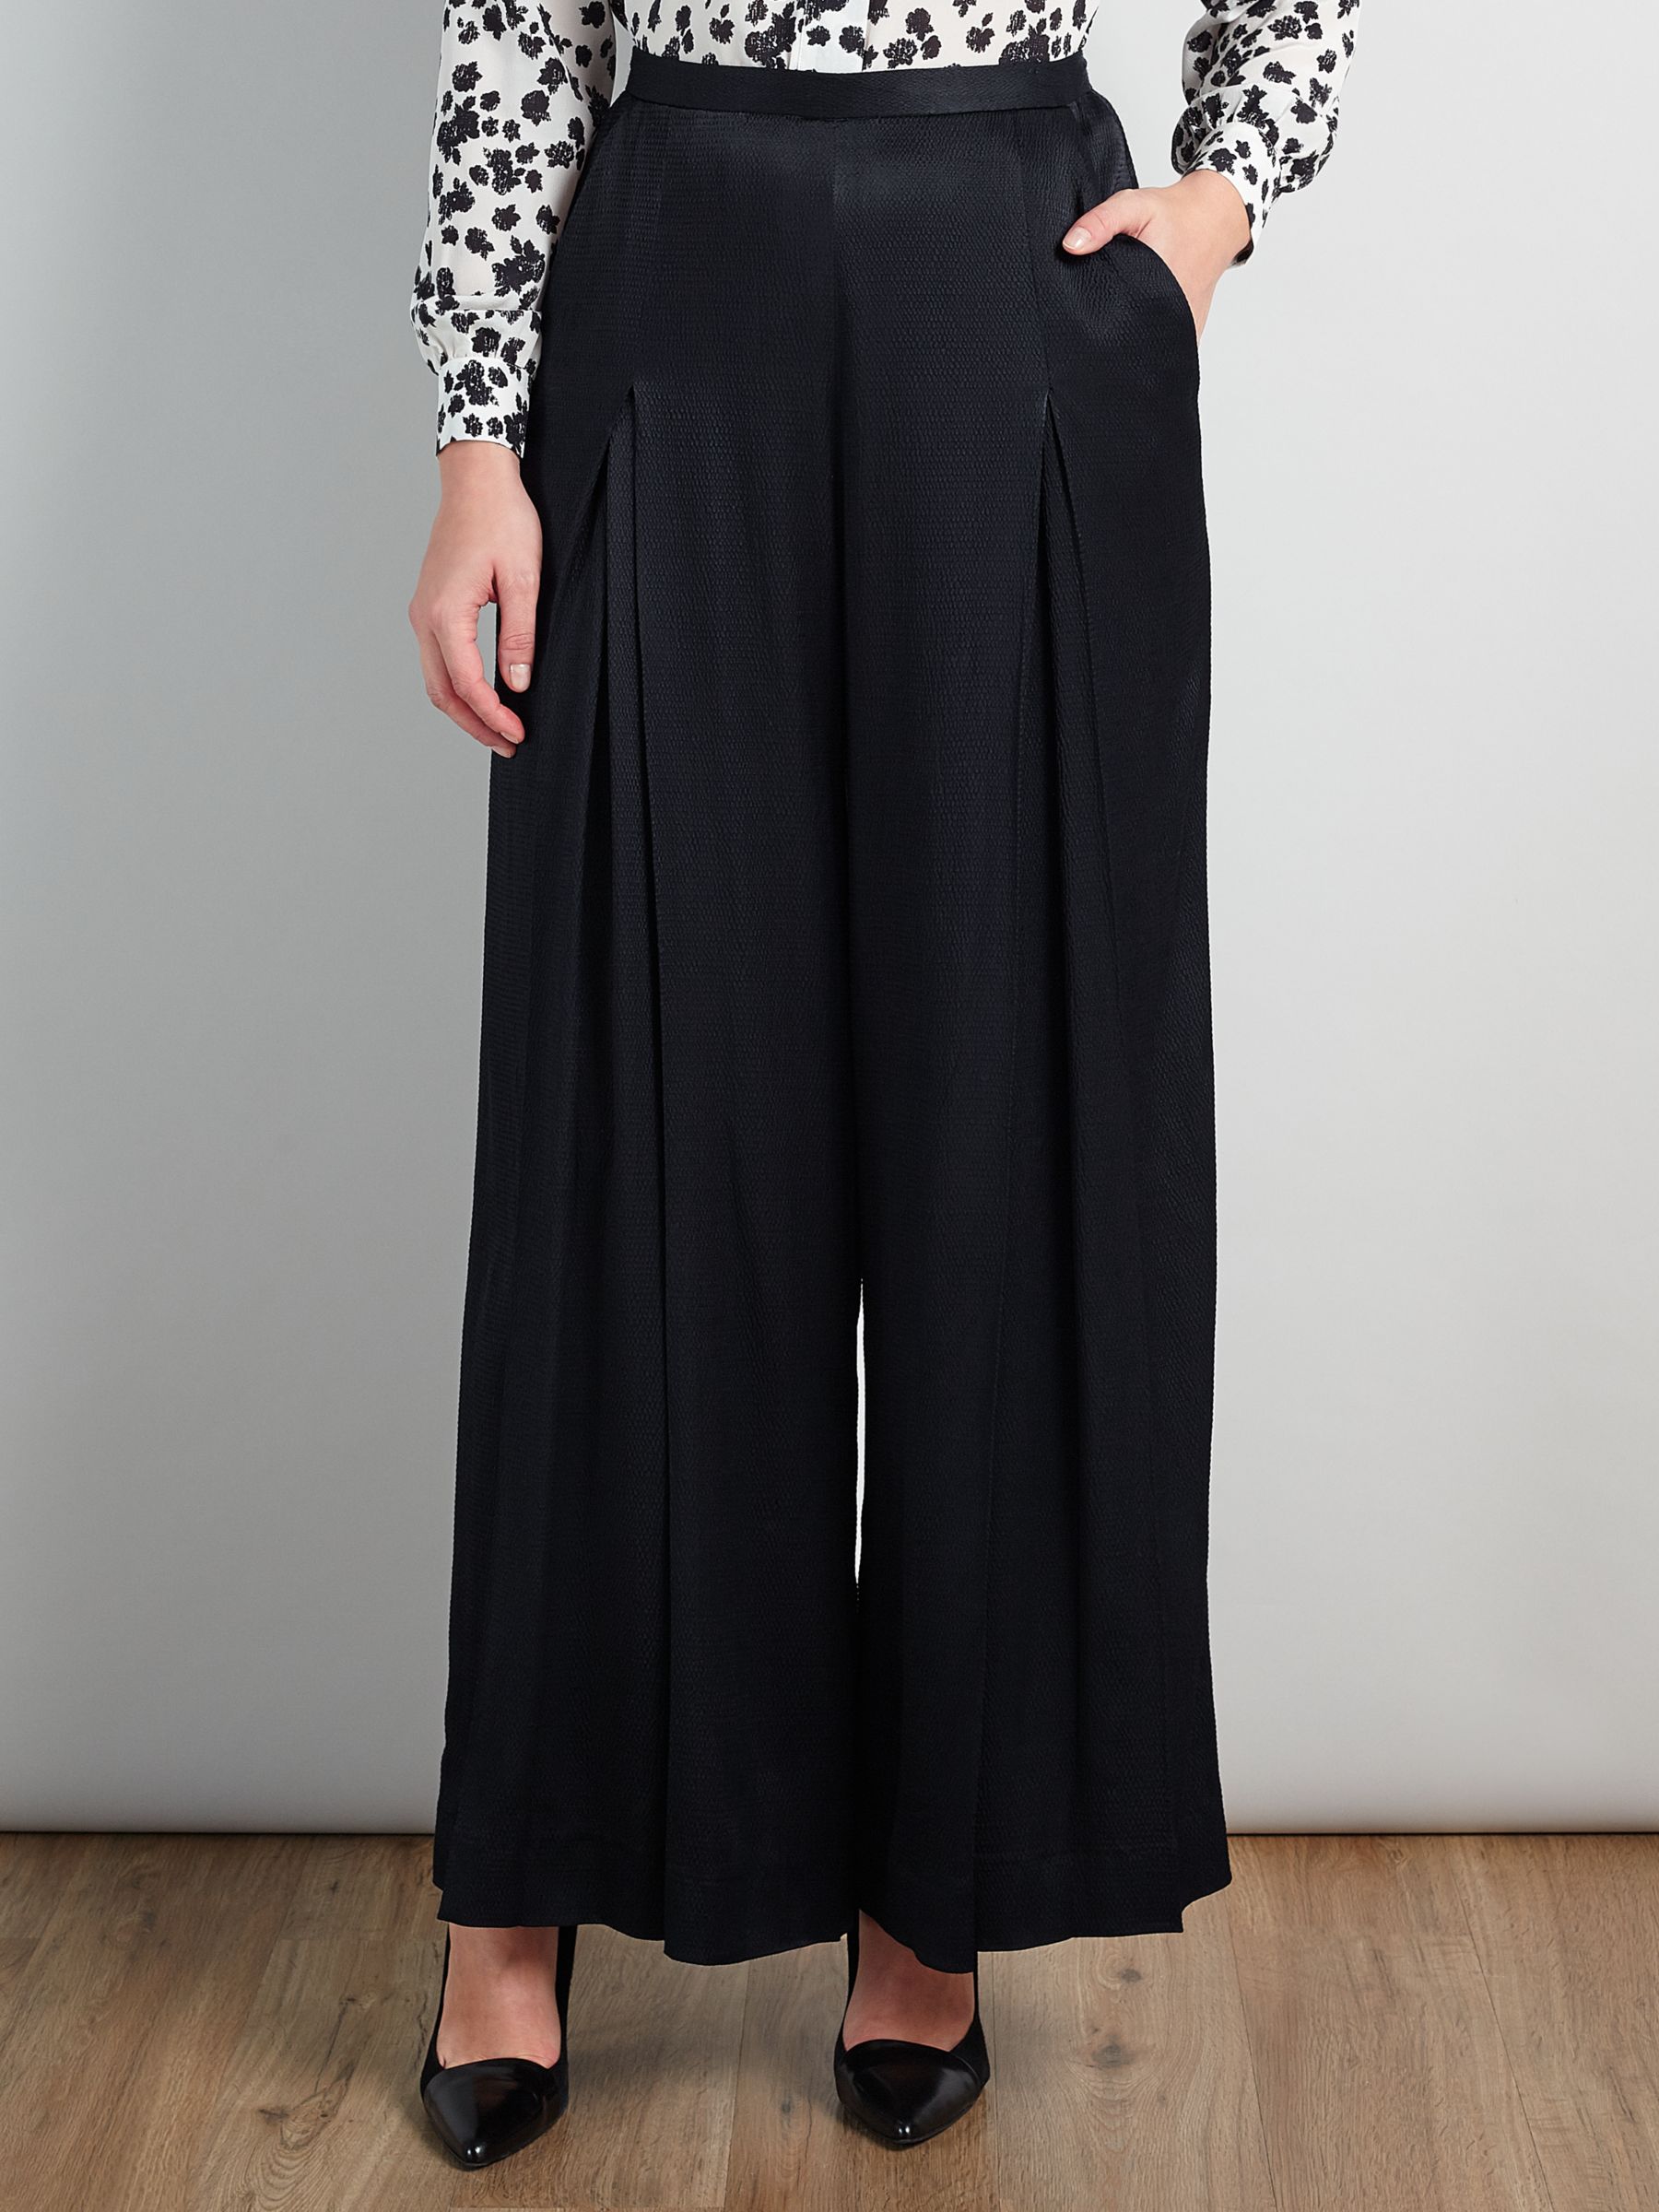 Bruce by Bruce Oldfield Wide Leg Textured Trousers, Black at John Lewis ...